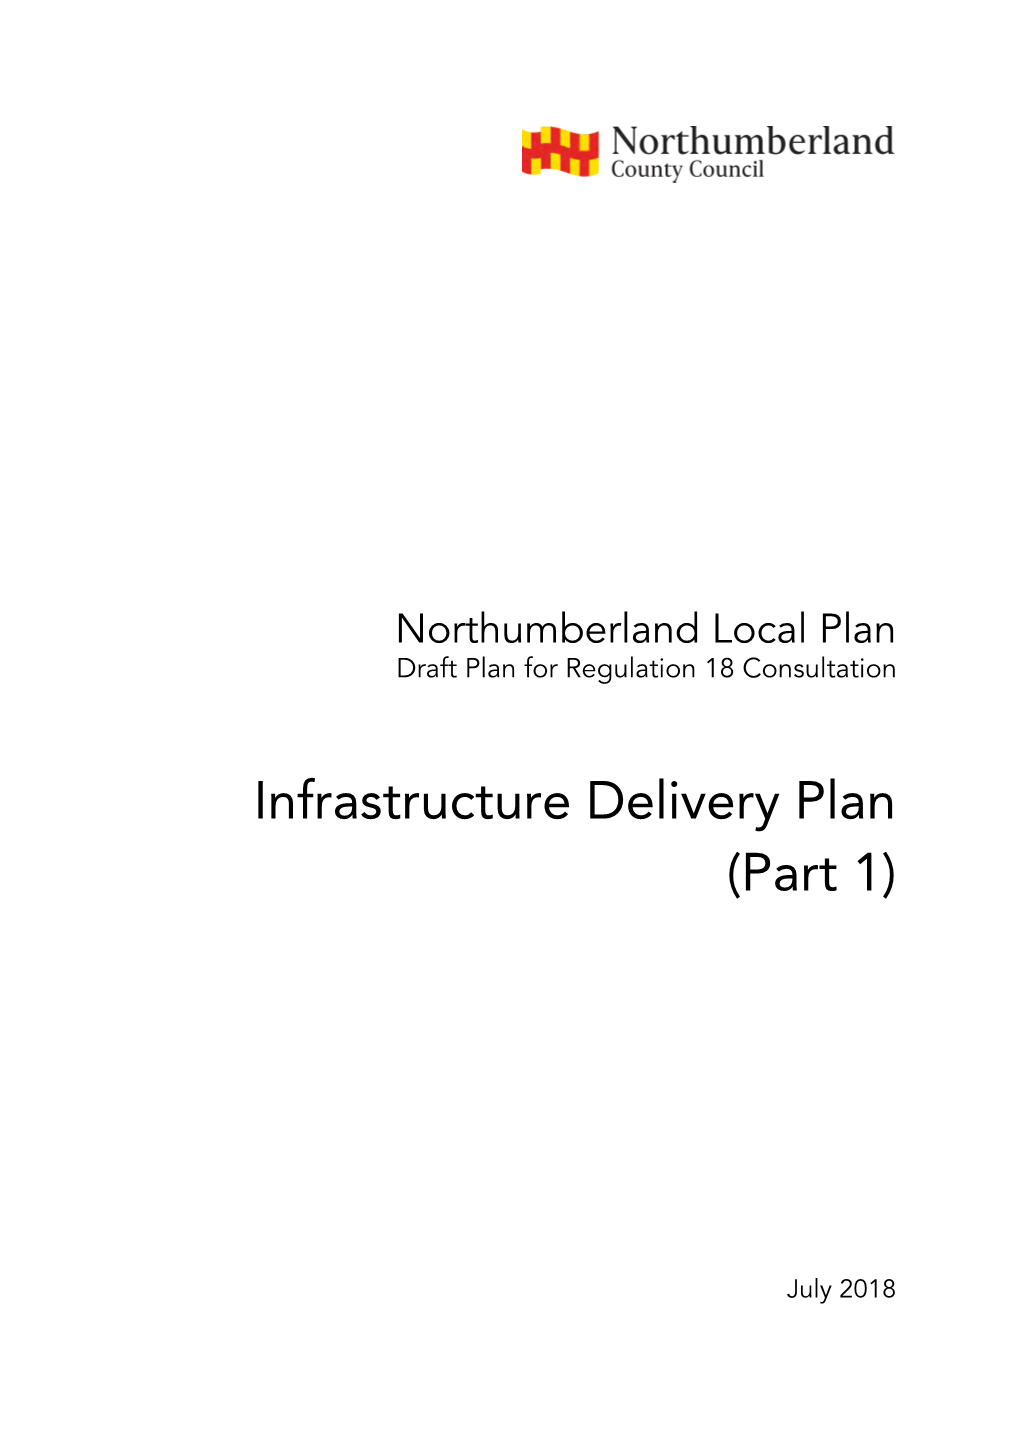 Infrastructure Delivery Plan (Part 1)